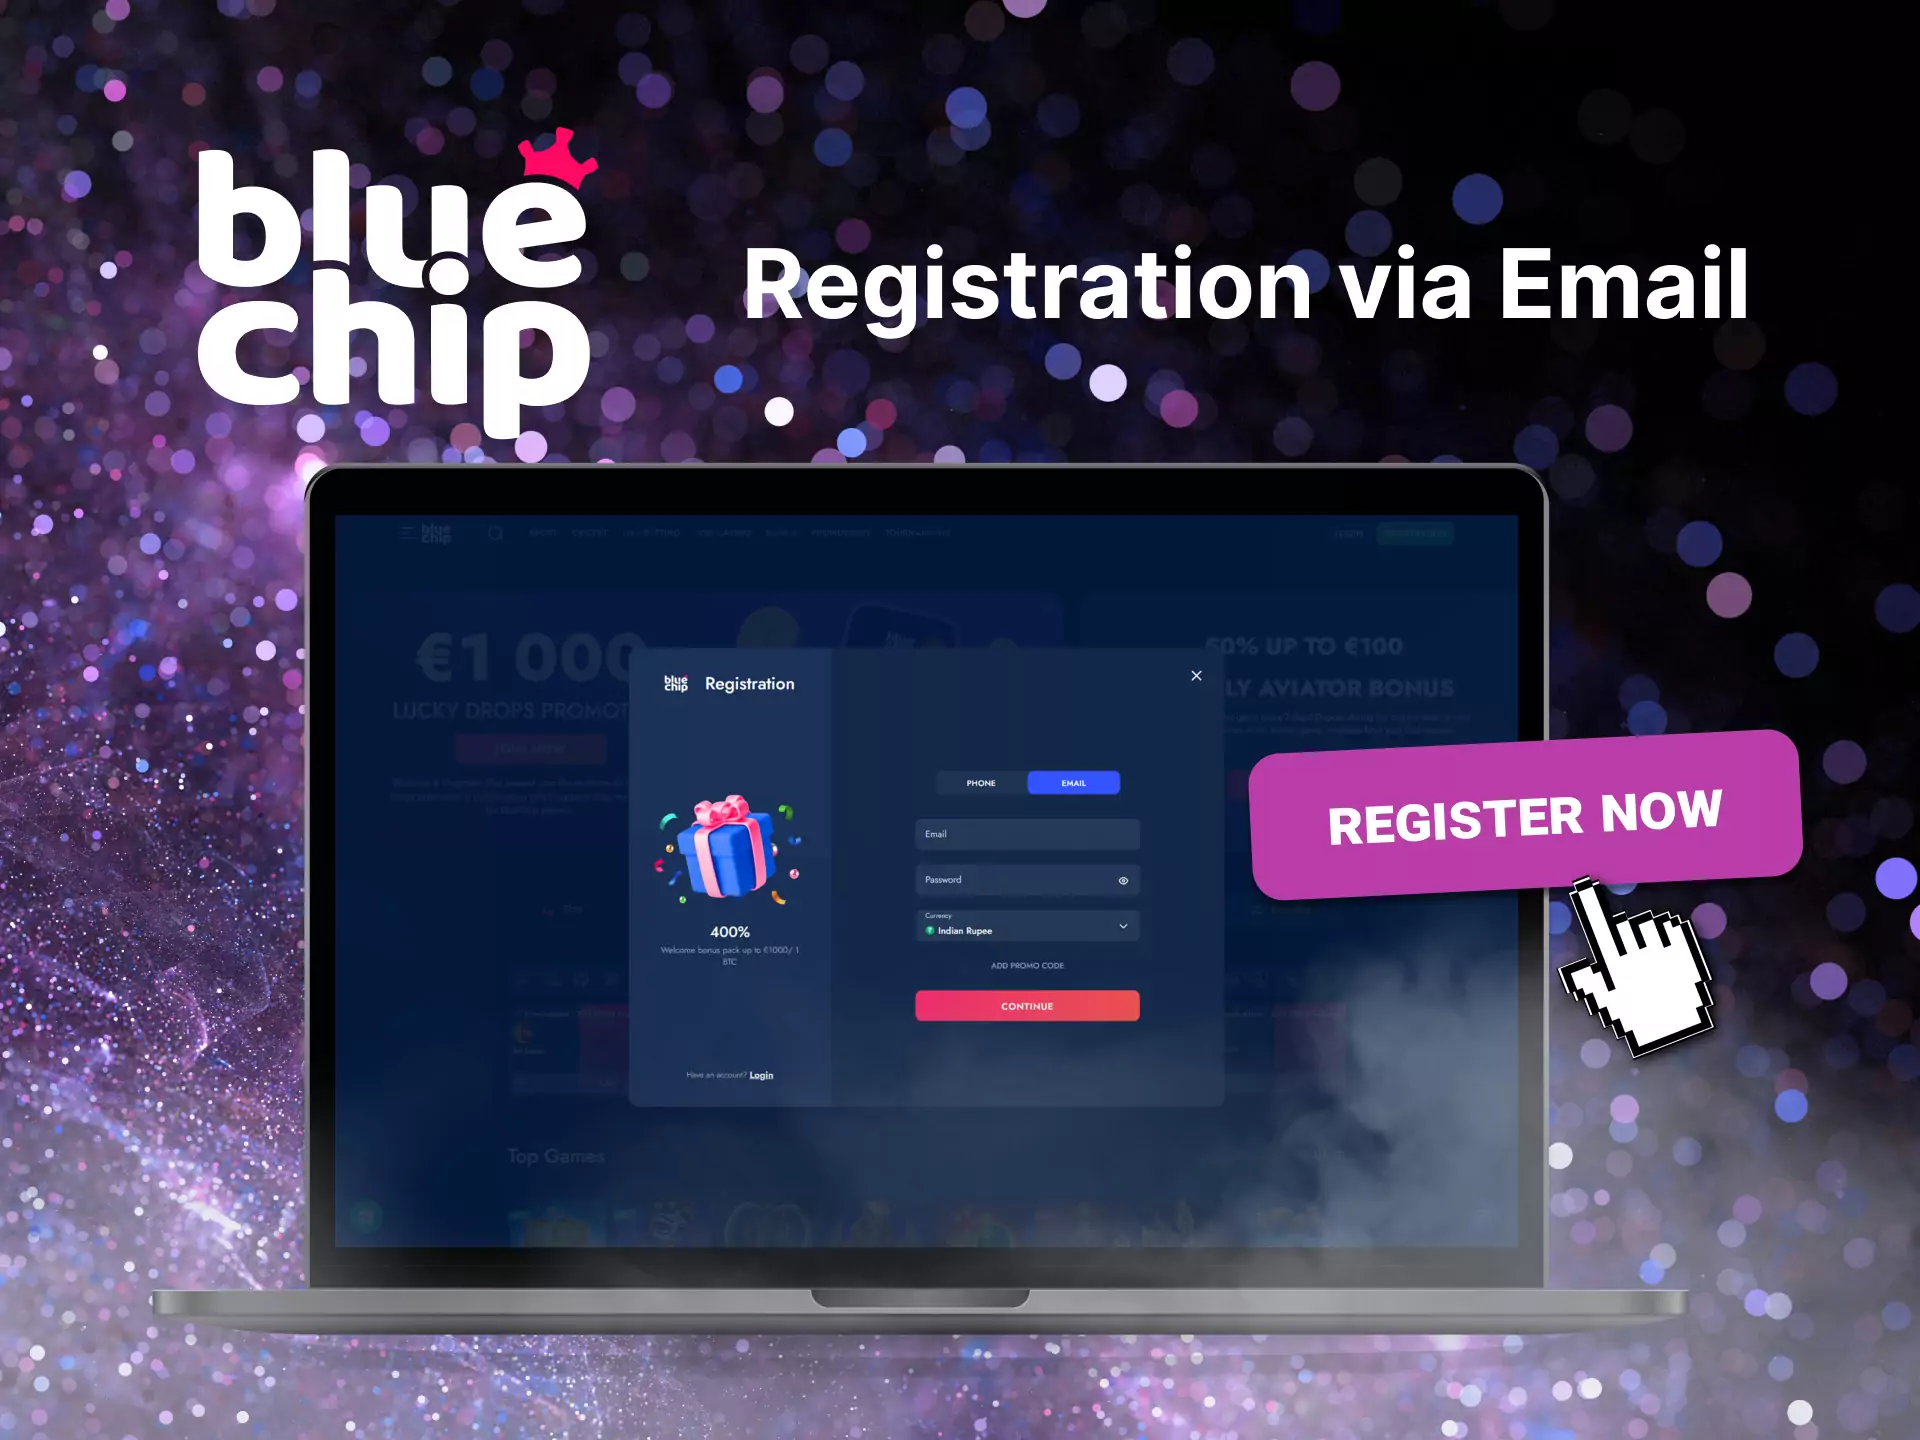 Register with Bluechip using your email.